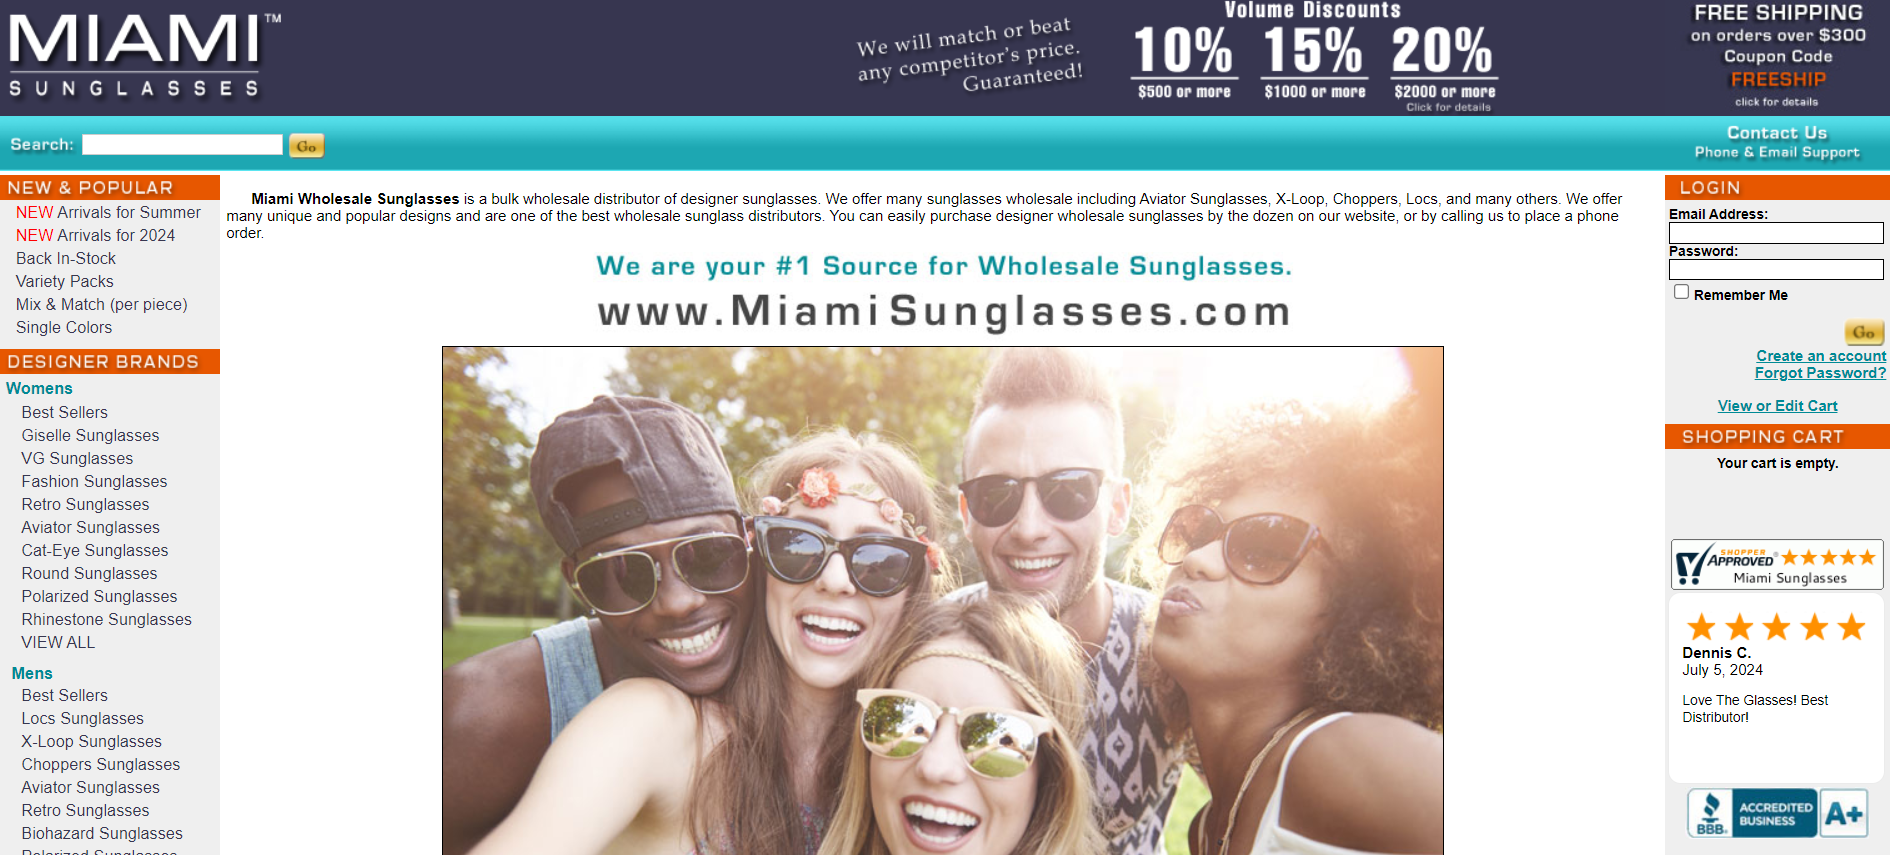 Miami Sunglasses, based in South Africa, offers an extensive range of sunglasses styles for both men and women. 